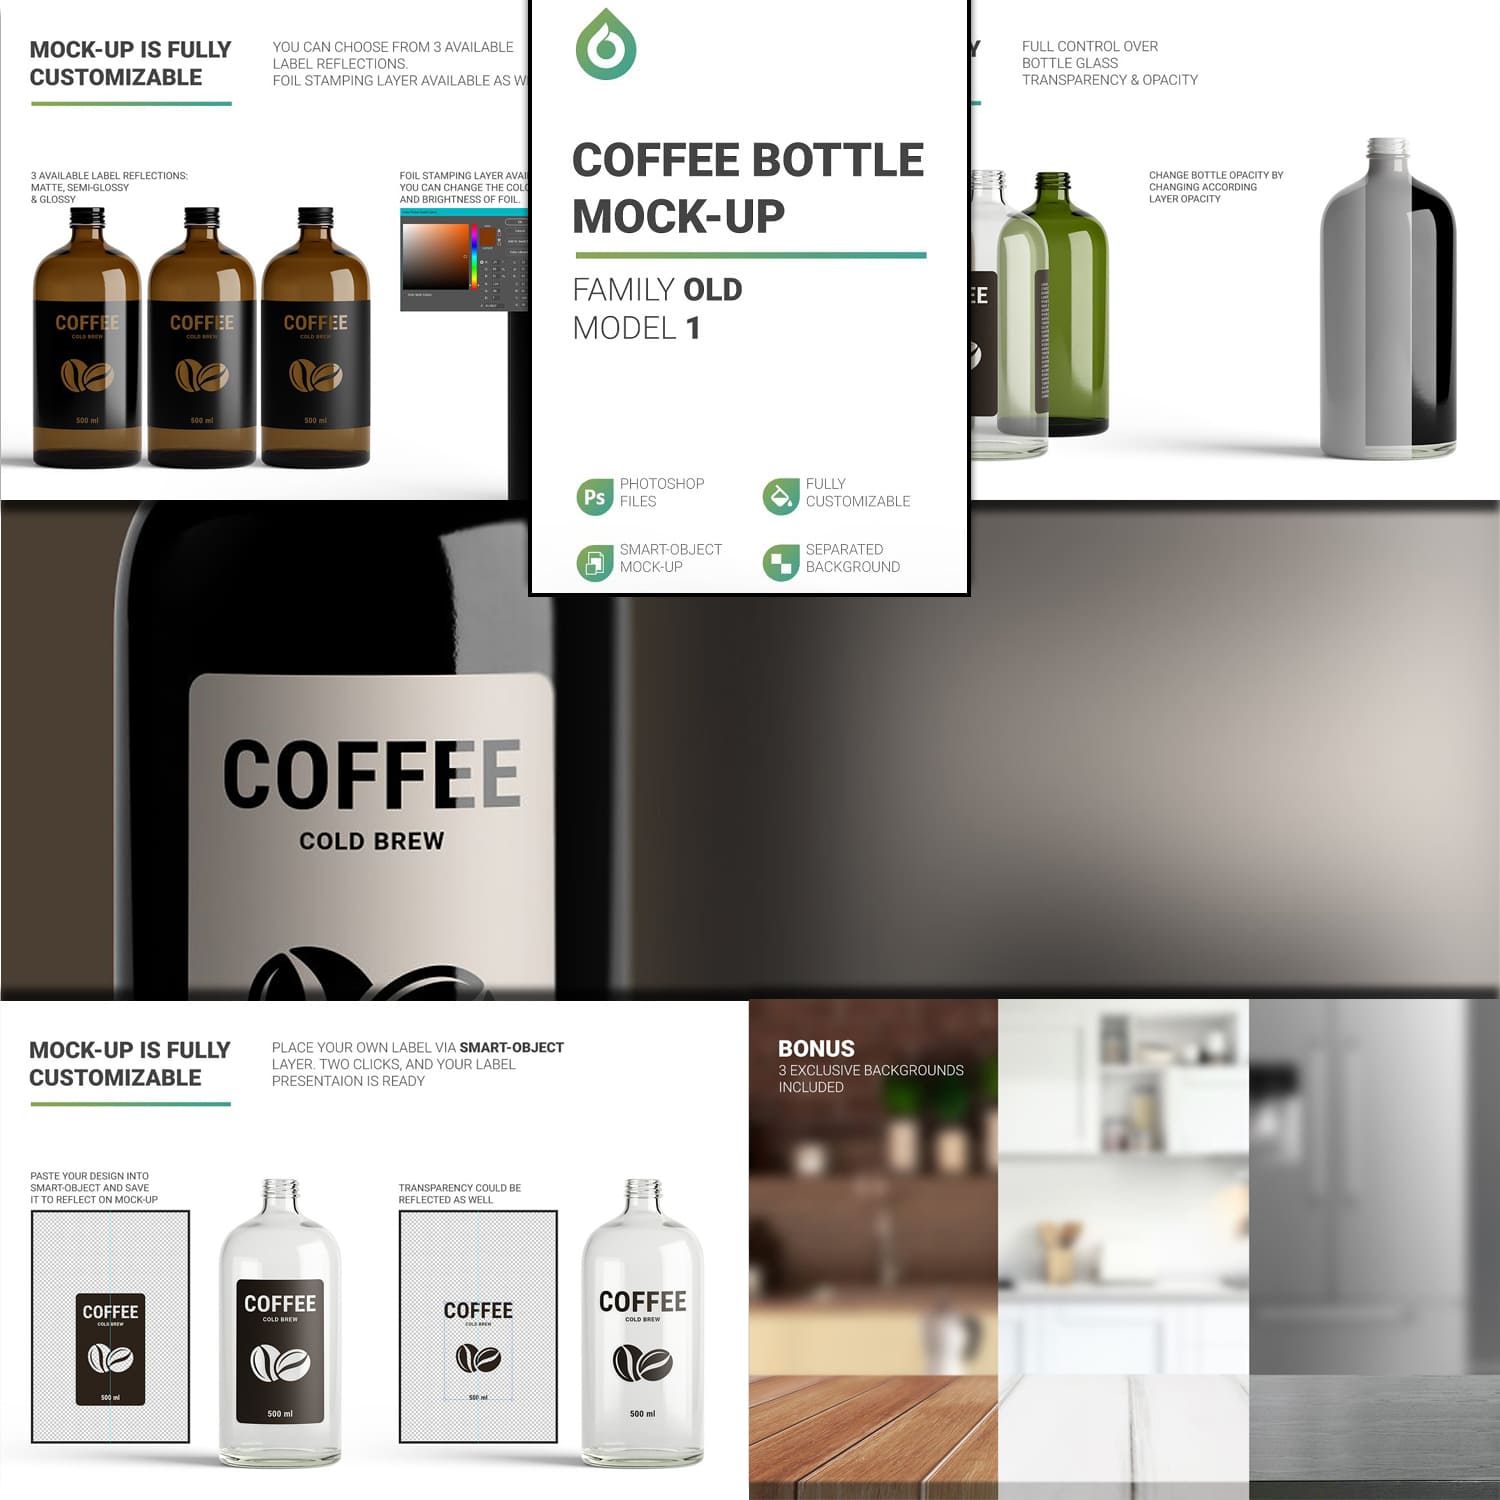 Coffee Bottle Mock-Up cover.